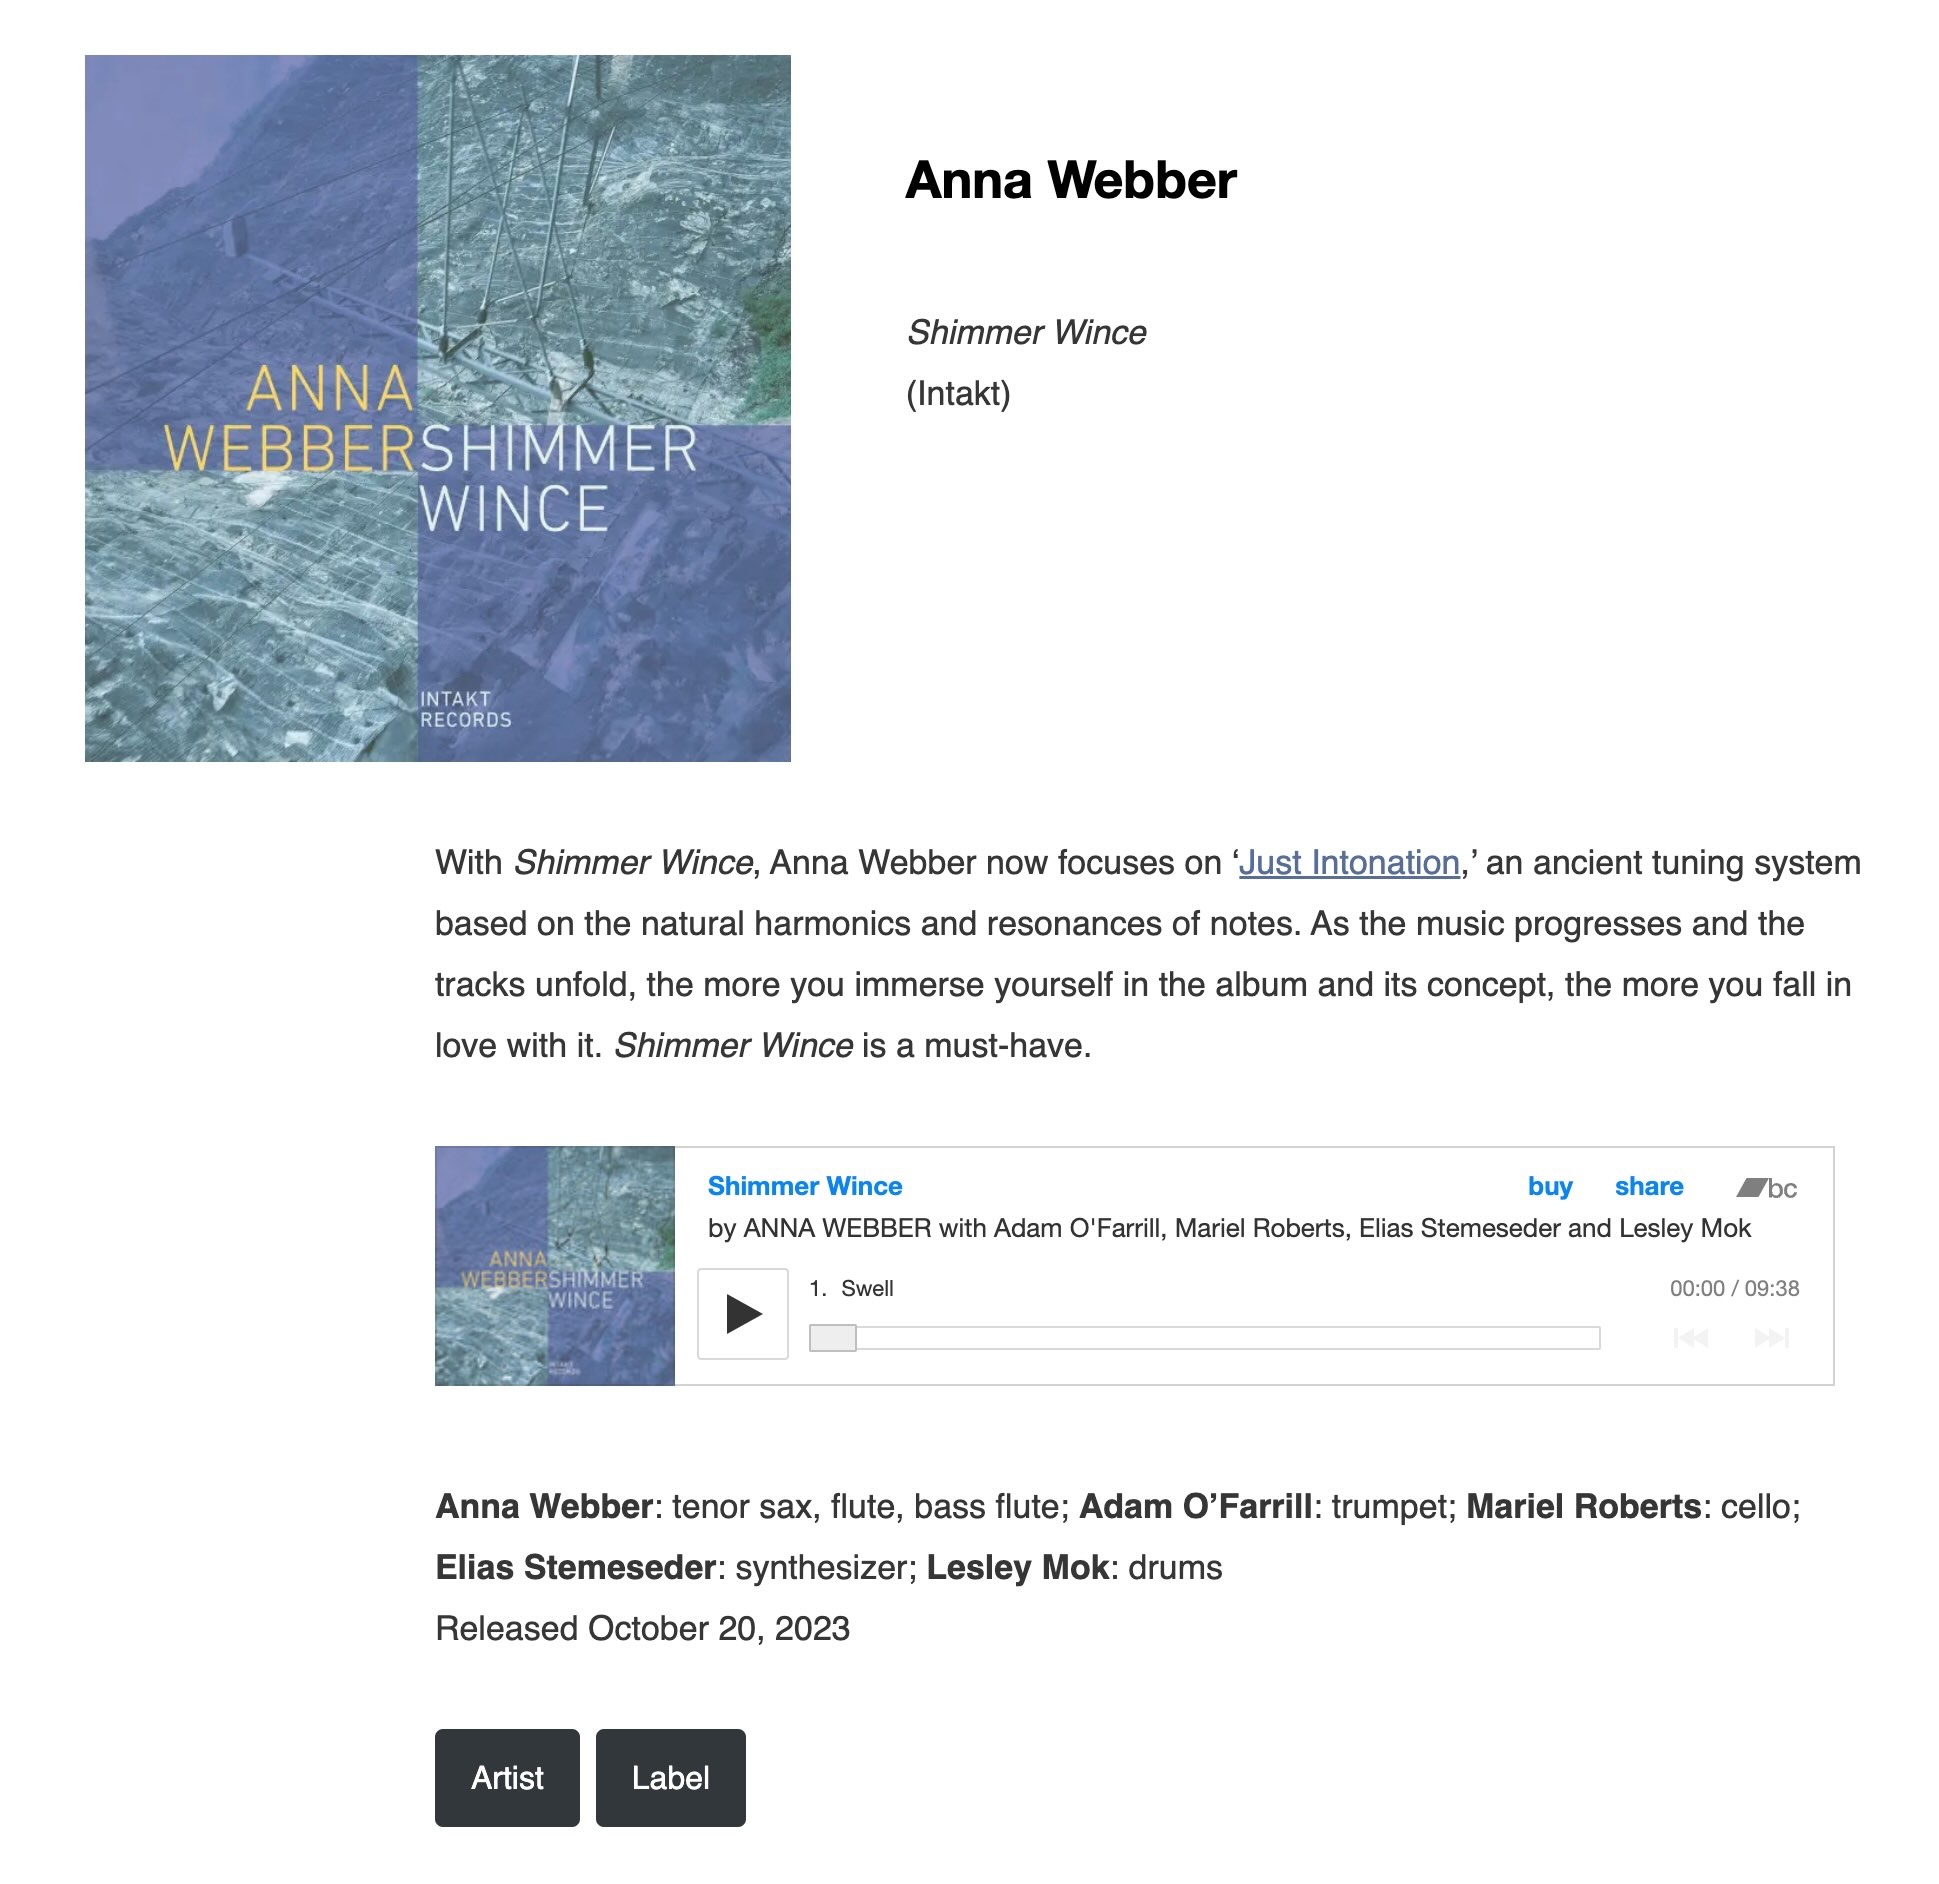 I have long been an ardent admirer of reedist and composer Anna Webber, one of the most ceaselessly inquisitive and restless figures in improvised music over the last decade. She has routinely looked beyond jazz for inspiration, repeatedly striking gold with her research into contemporary music. I’ve loved just about everything she’s done, but her 2019 album Clockwise (Pi) convinced me that she was a major figure: that rare breed that’s actually changing the way I take in sound and potentially altering the trajectory of creative music. On that septet album she isolated specific ideas gleaned from composers like Xenakis, Cage, Varese, Feldman, Stockhausen and Babbitt, triangulating those concepts within her own compositional voice to produce one of the decade’s best recordings.